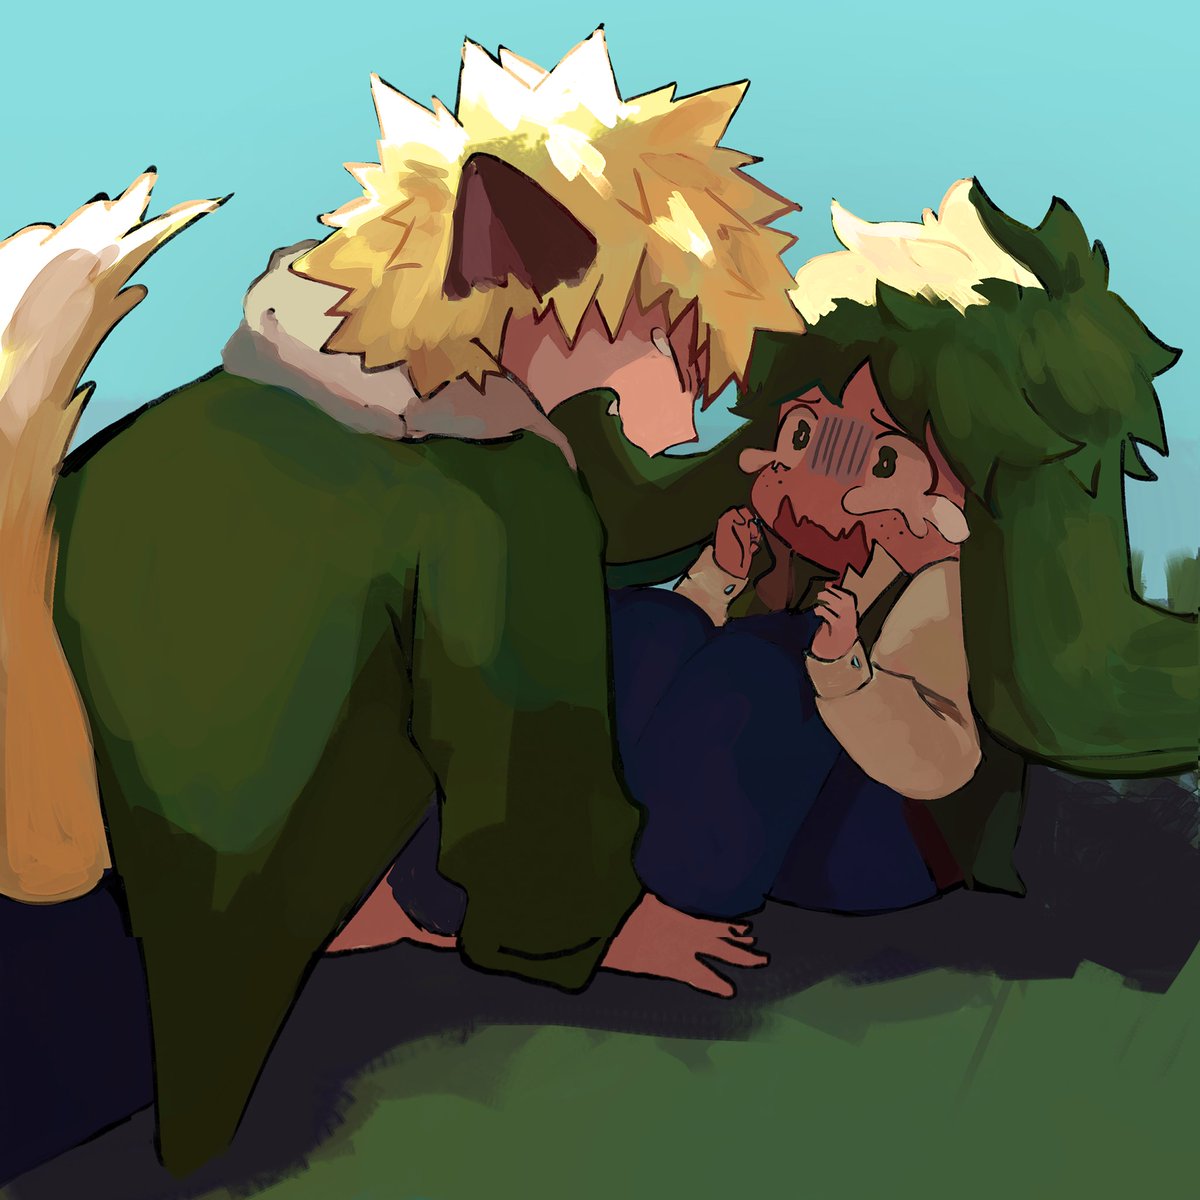 Decided to just finally dig through my old files and finish this off quickly so it looks super inconsistent hahaha

This whole series of doodles I did somewhere last year but I got lazy to complete... The top was painted in March LOL

#bkdk #bakudeku #胜出 #勝デク 